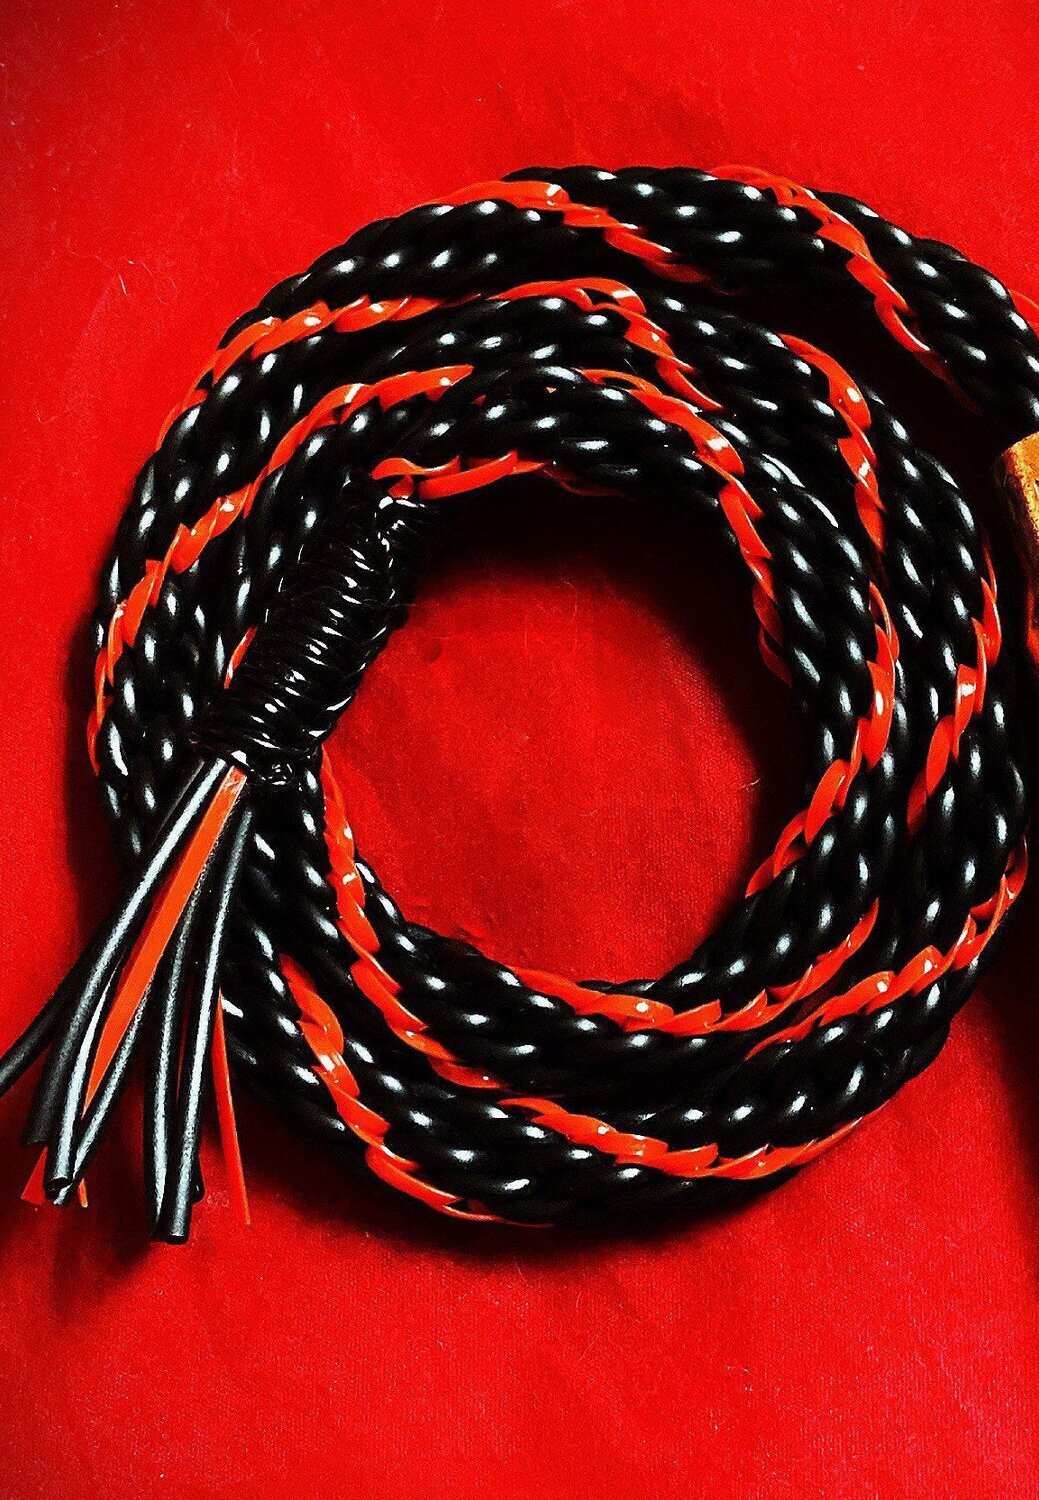 Custom Kumihimo Hand Braided Whip Flogger Customize your own  Impact Play BDSM  Blissful  Discipline Flogger